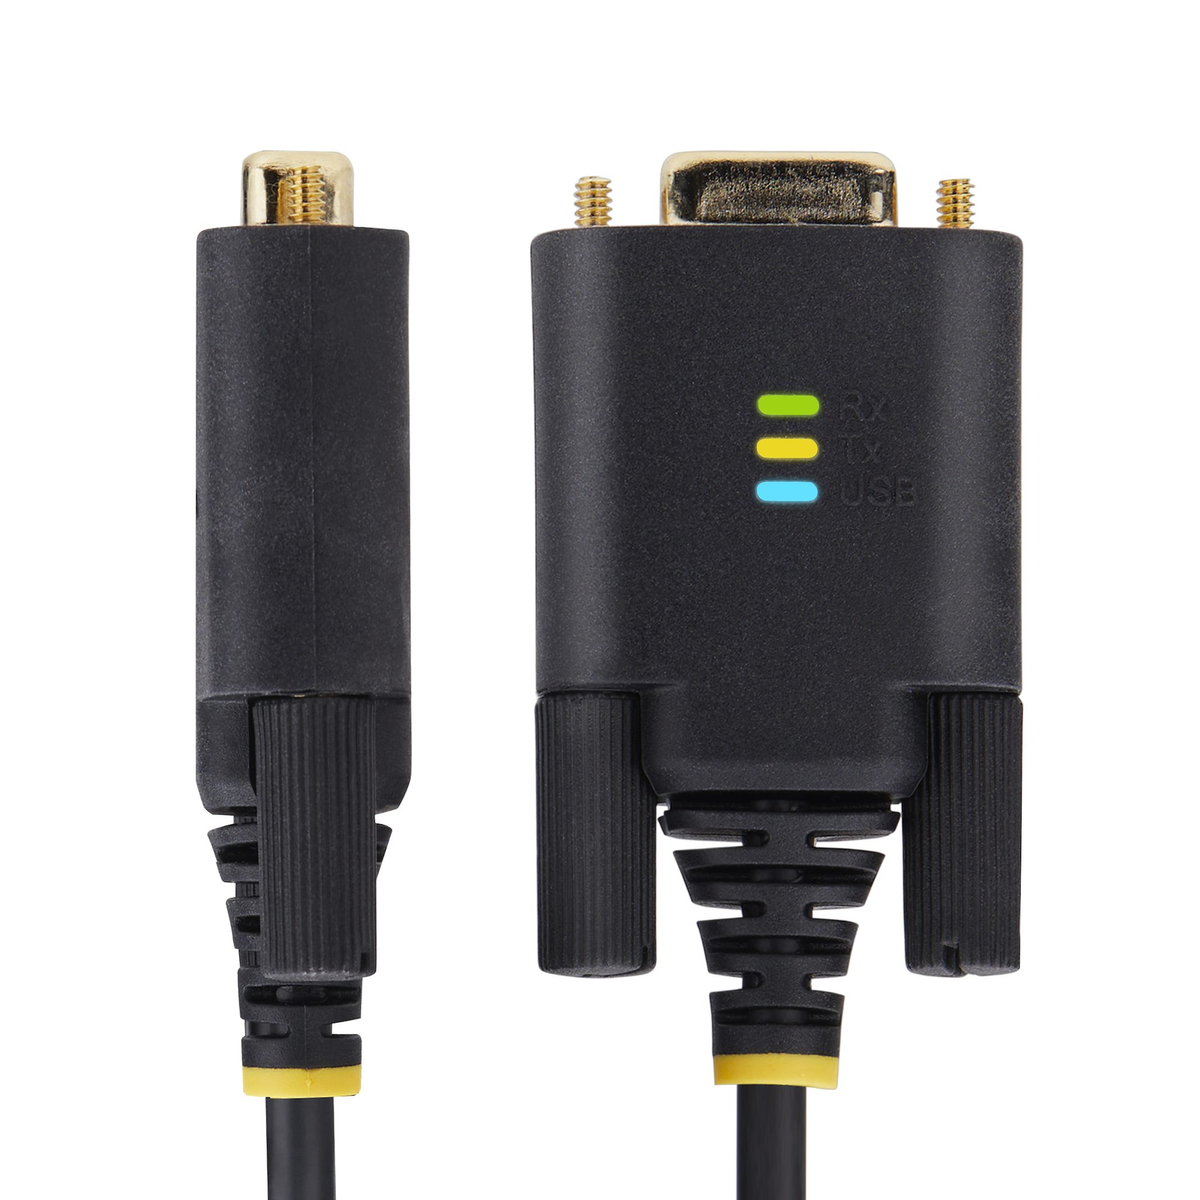 3ft (1m) USB to Null Modem Serial Cable